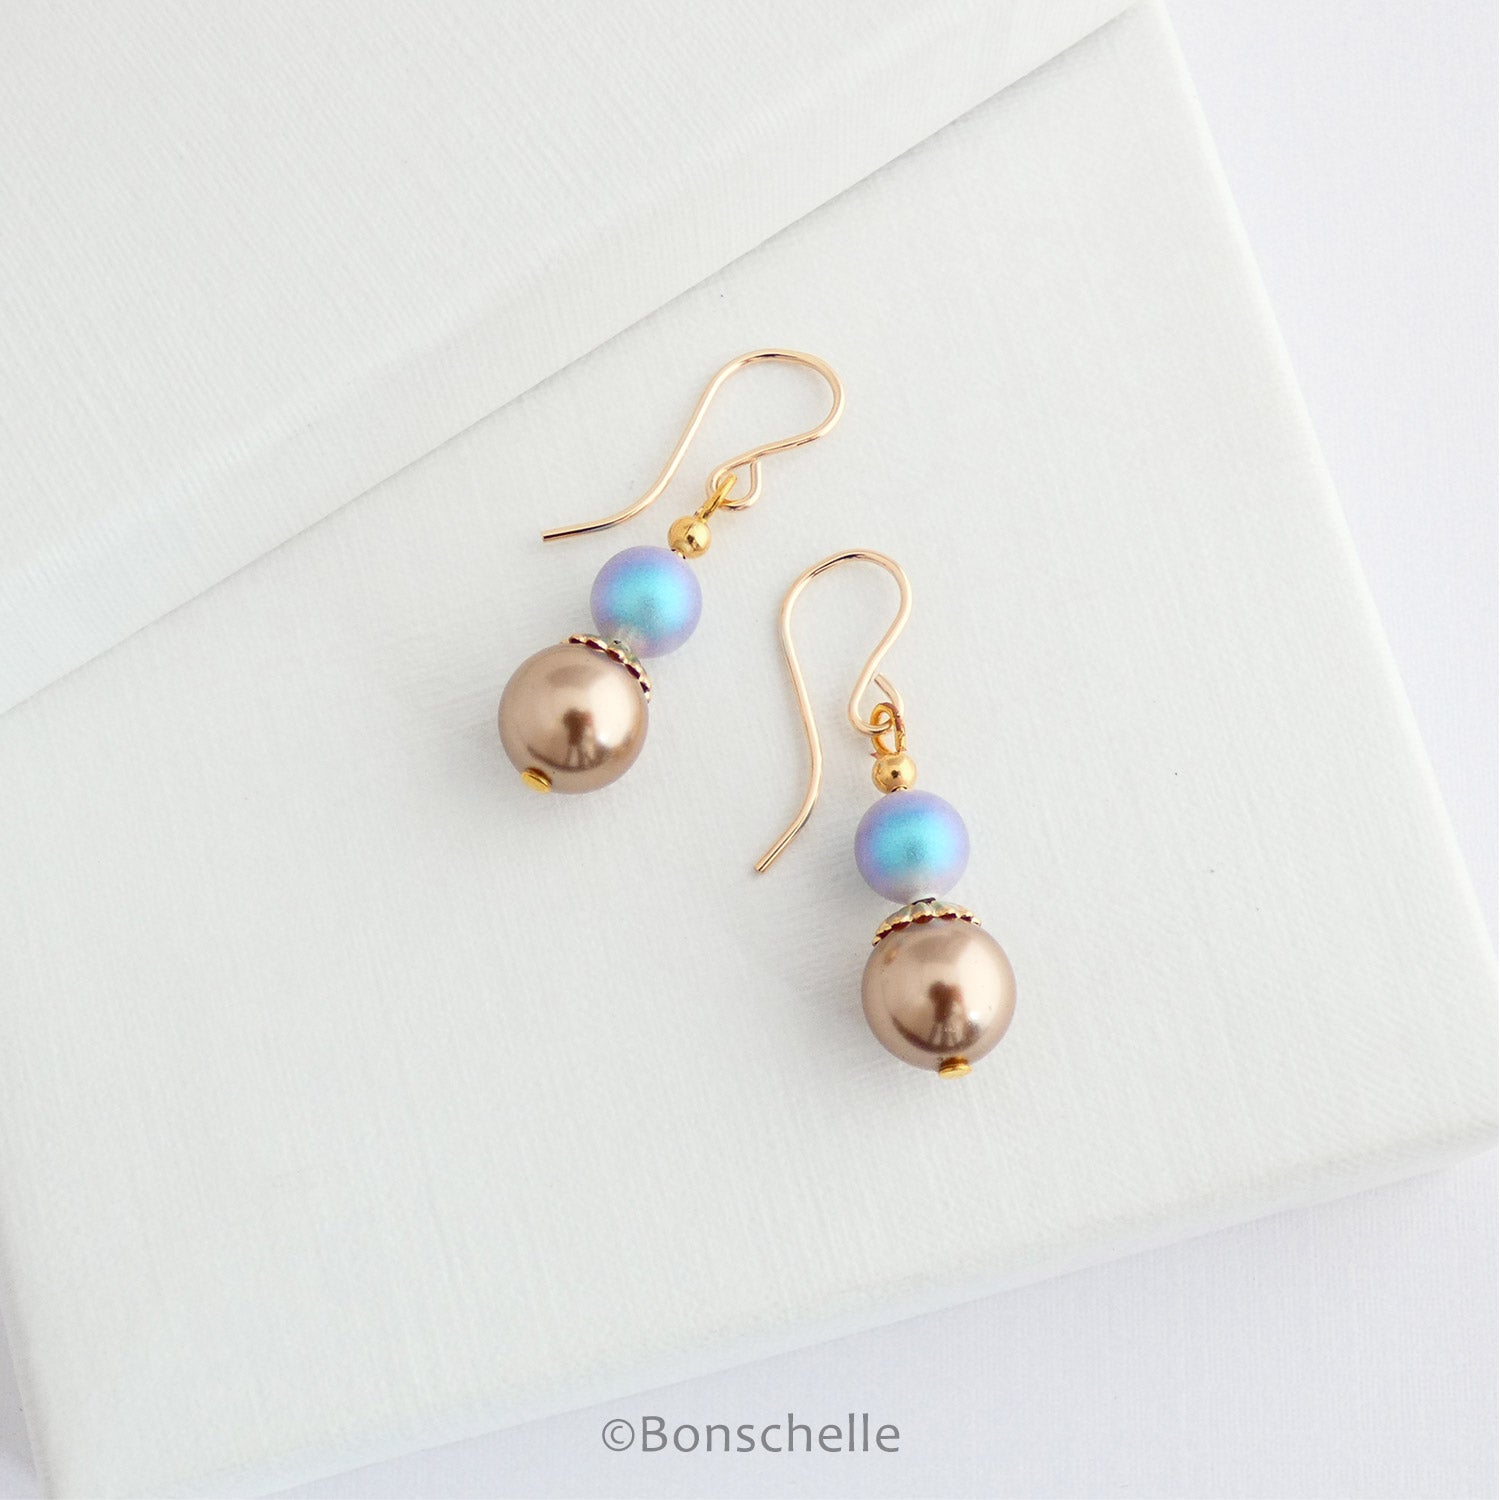 Women's handmade bronze and sky blue pearl earrings laying on a jewellery box